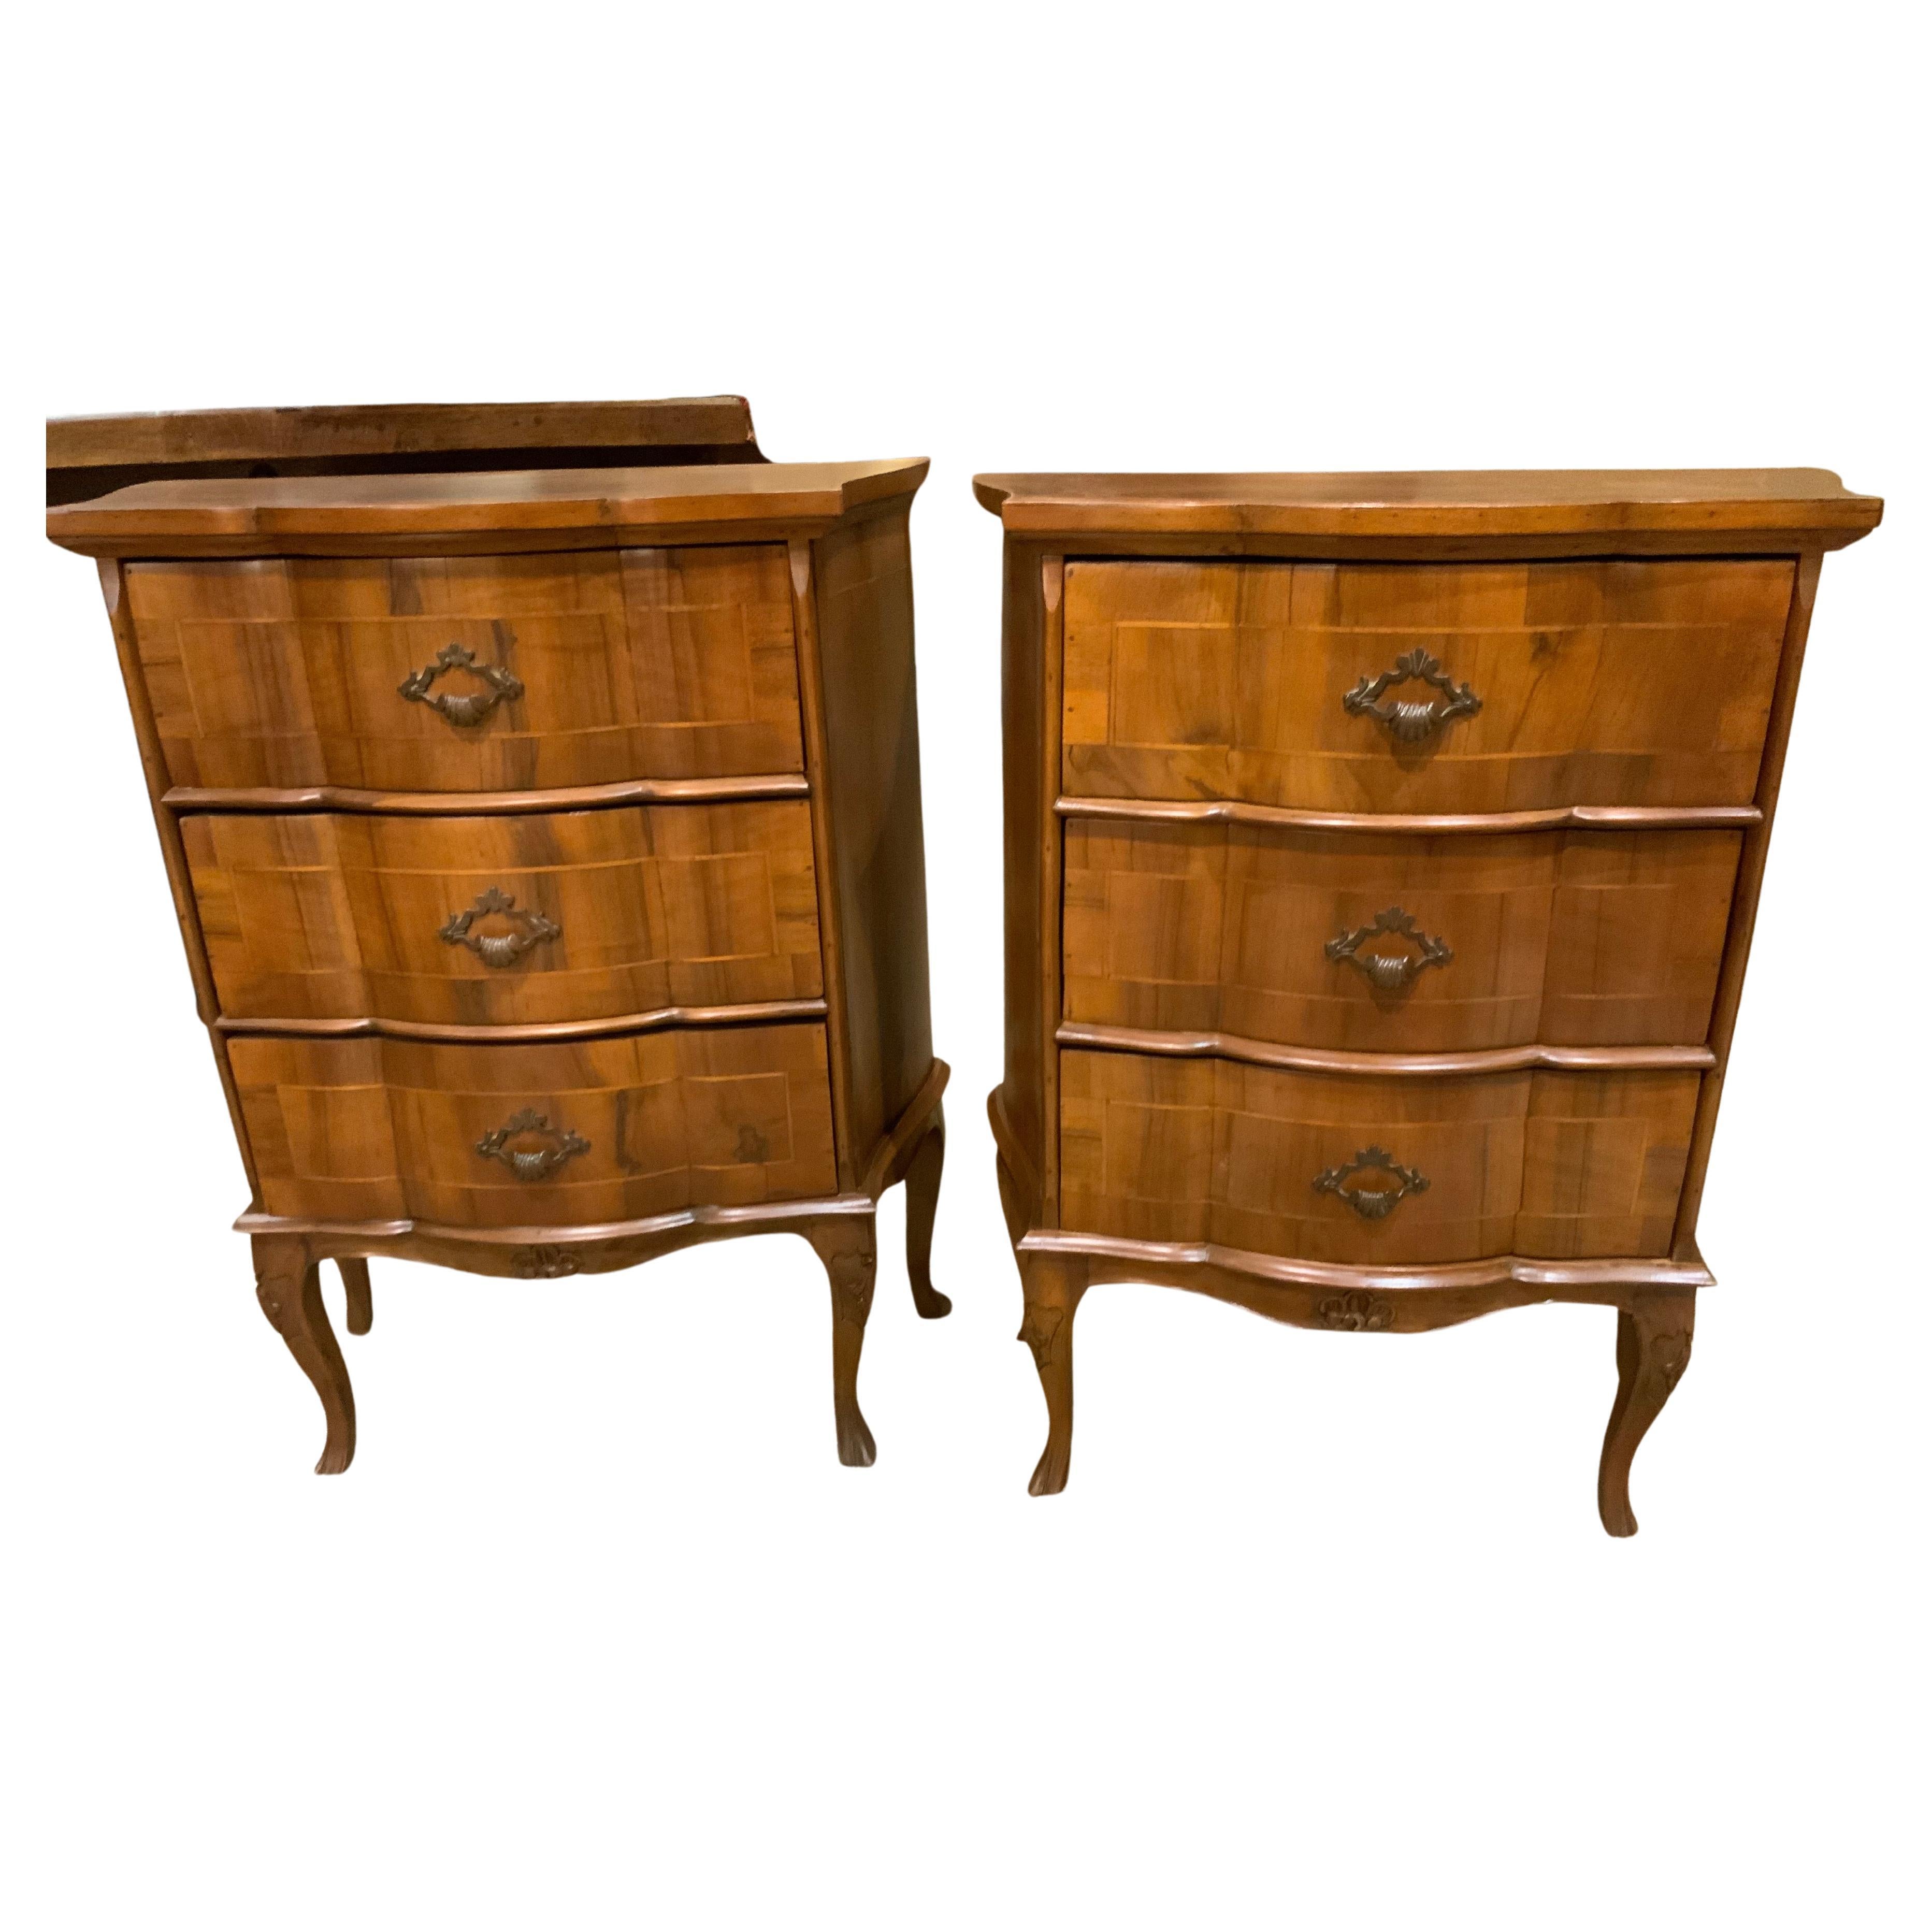 Pair of Night Stands / Bedside Chests, French